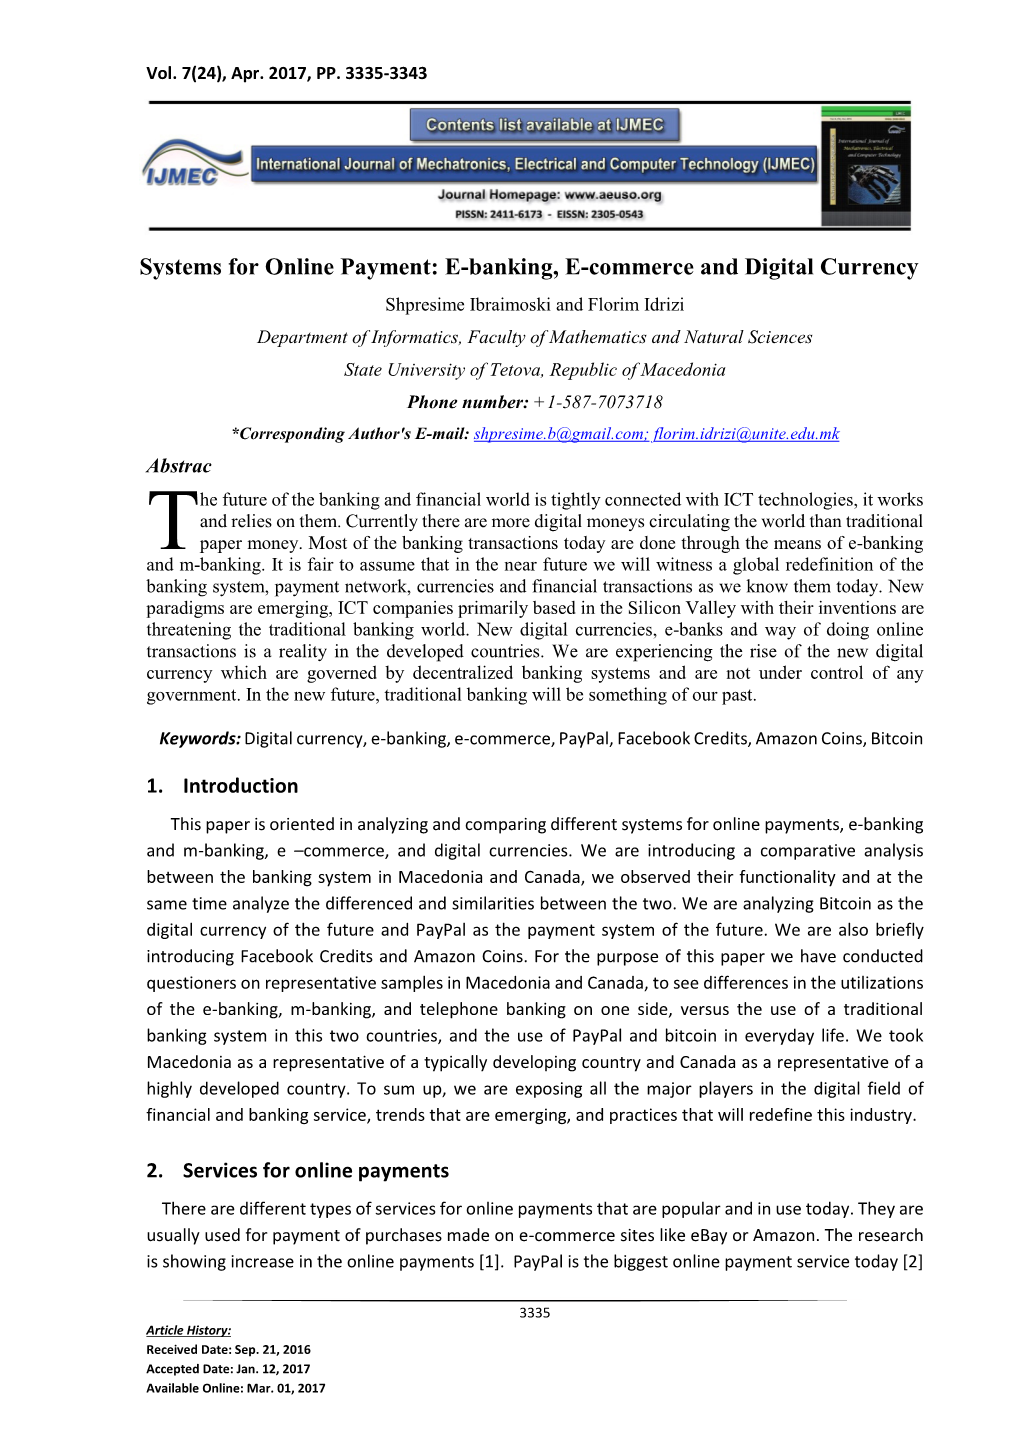 Systems for Online Payment: E-Banking, E-Commerce and Digital